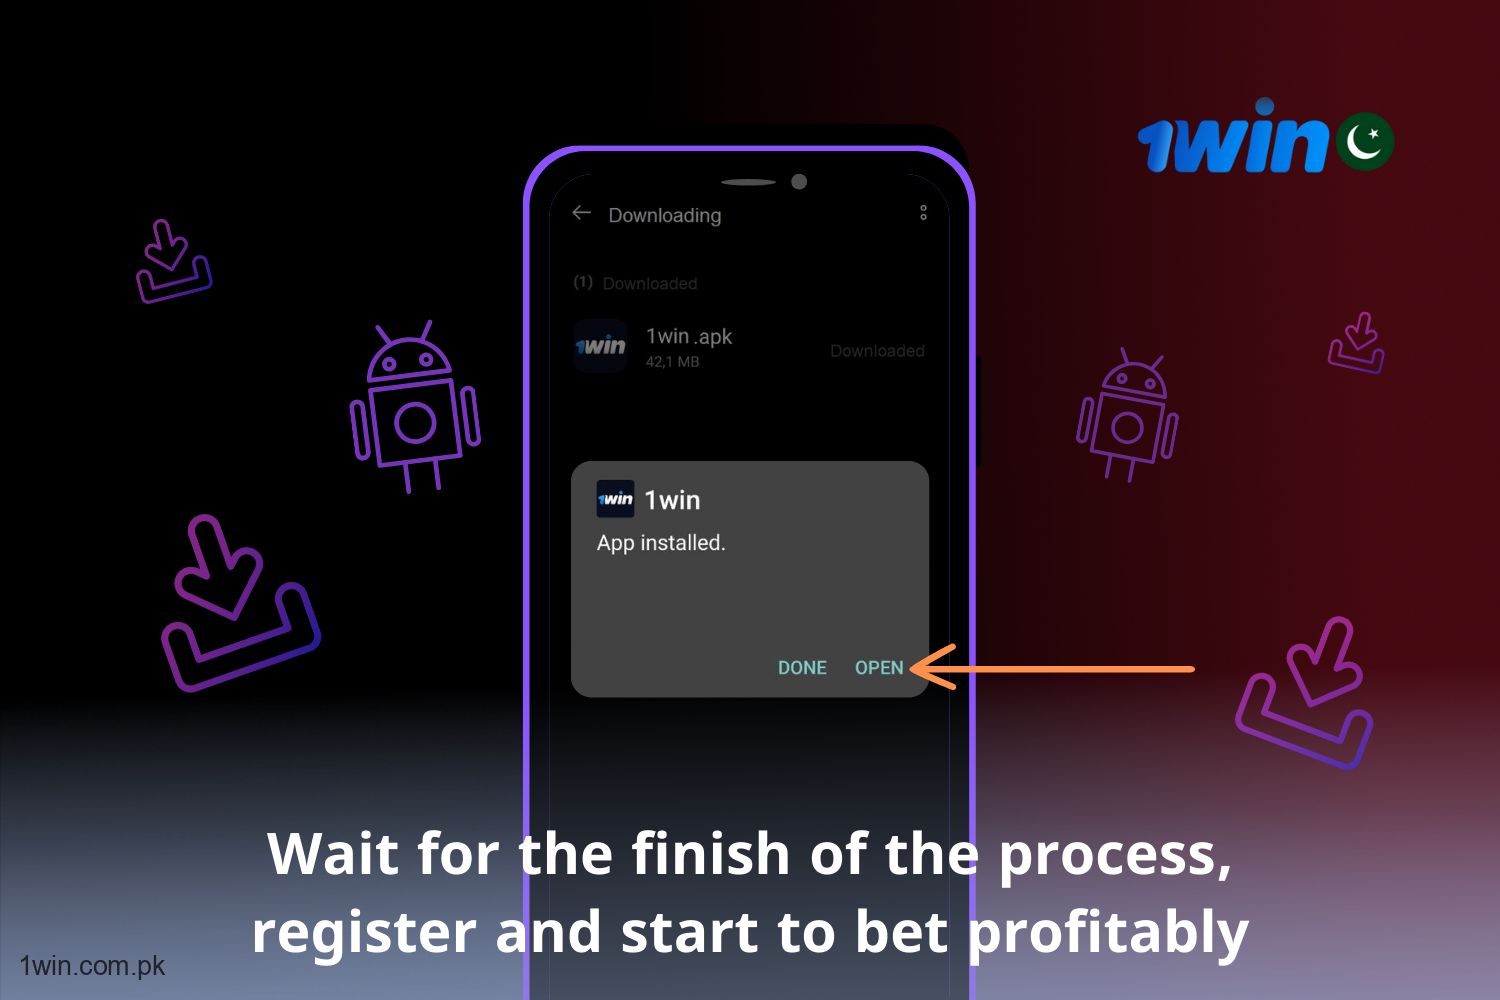 After installing the Android app, a user from Pakistan can register and start betting with profit